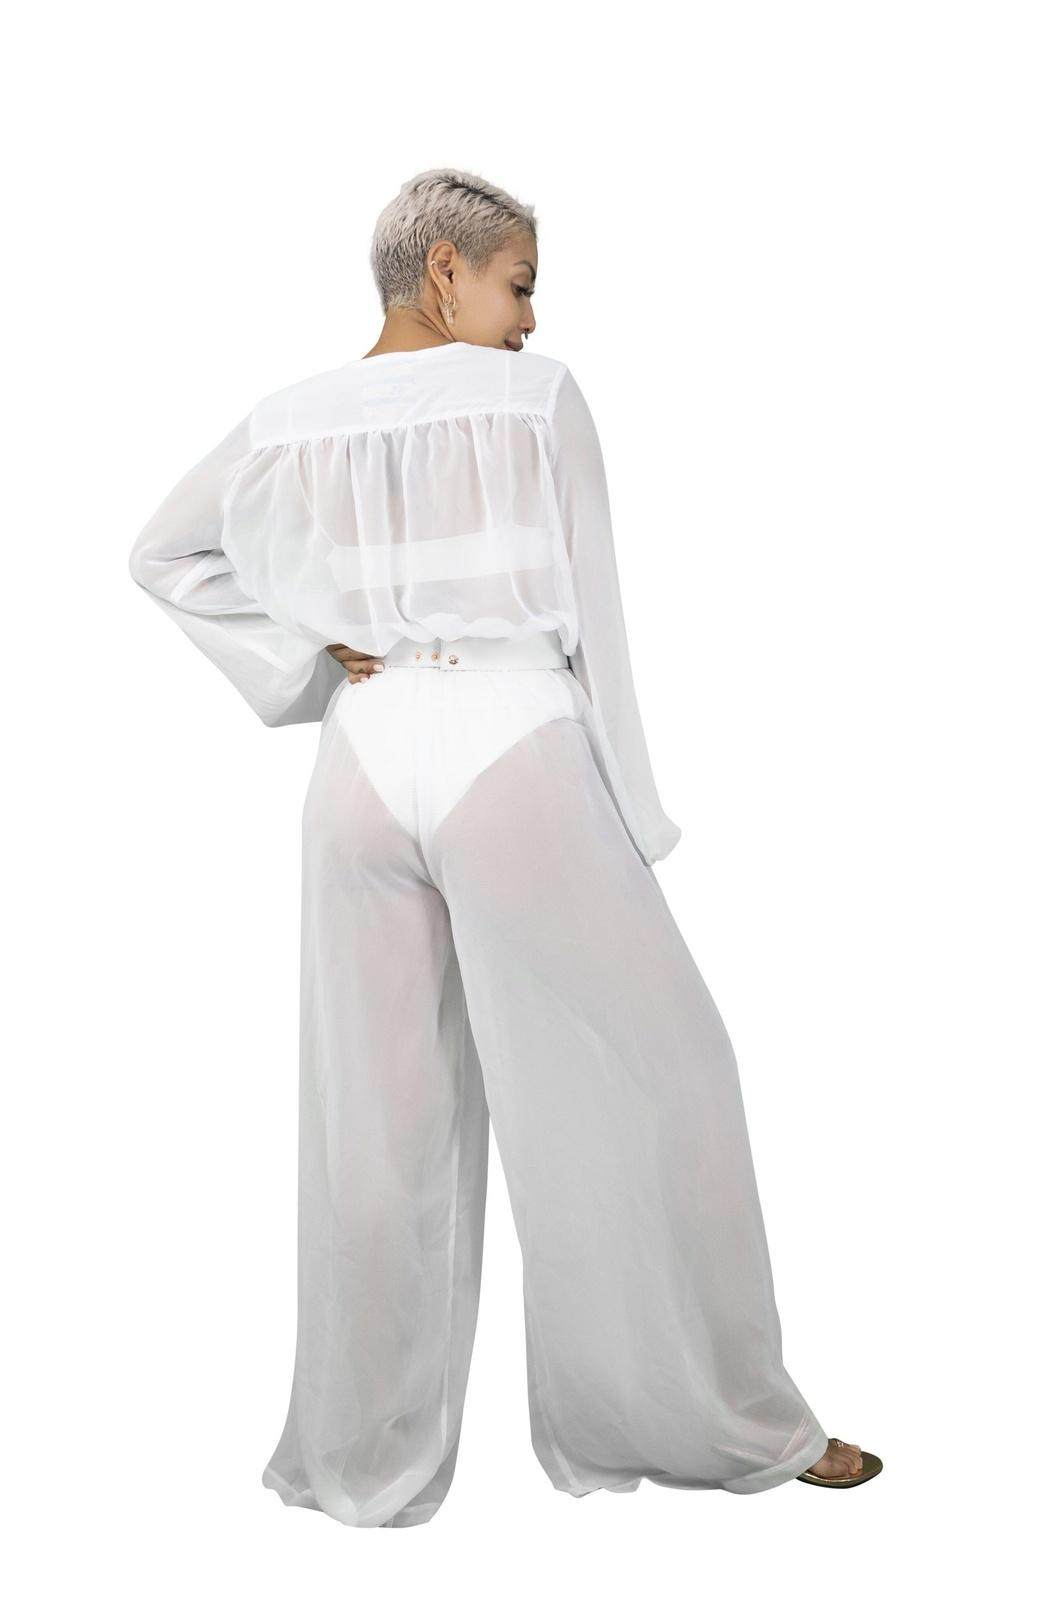 The Oasis Sheer Chiffon Jumpsuit in Porcelain White From Love Khaos Resort Wear Brand.